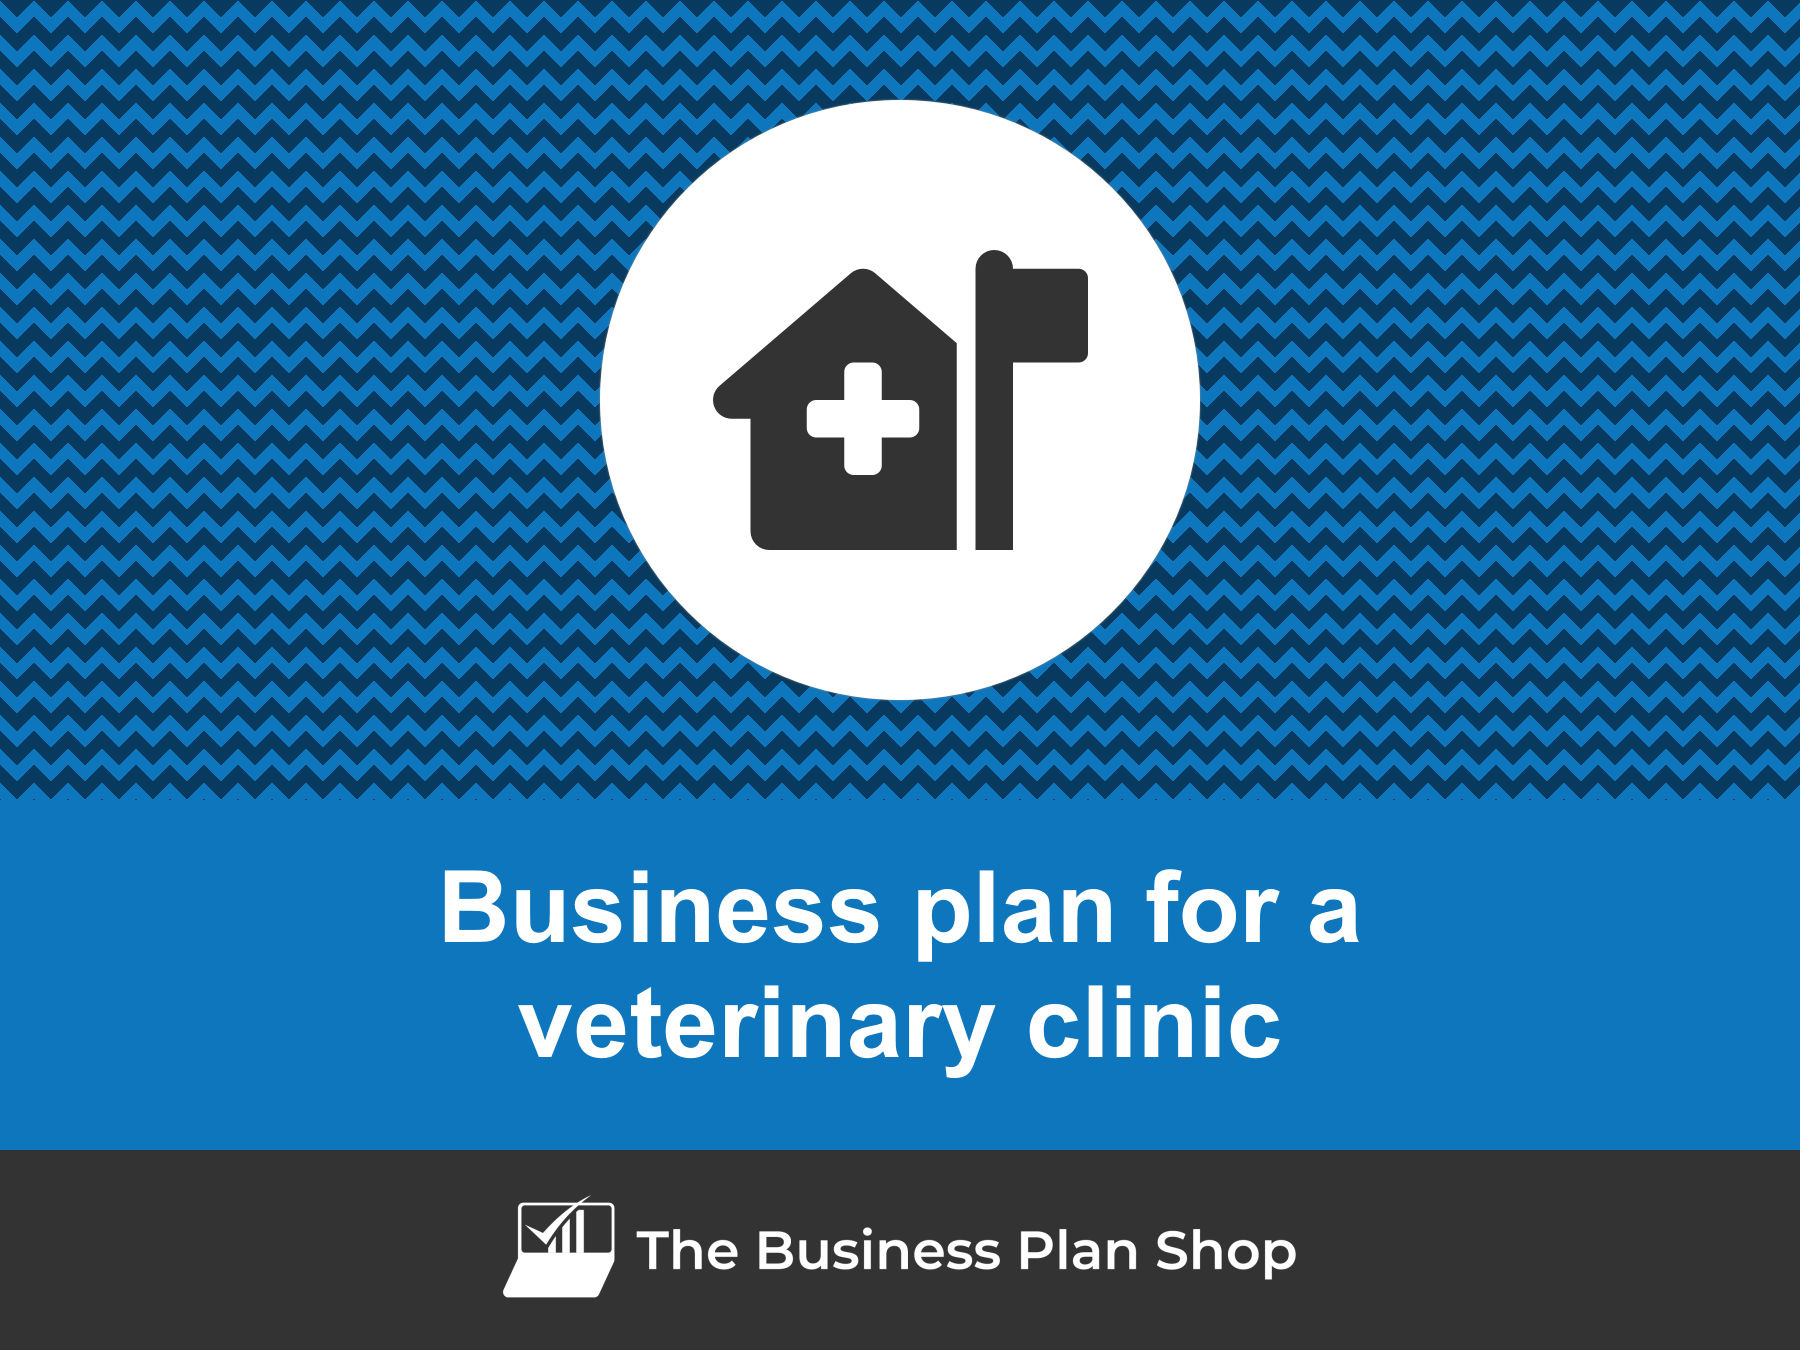 how to make a veterinary clinic business plan